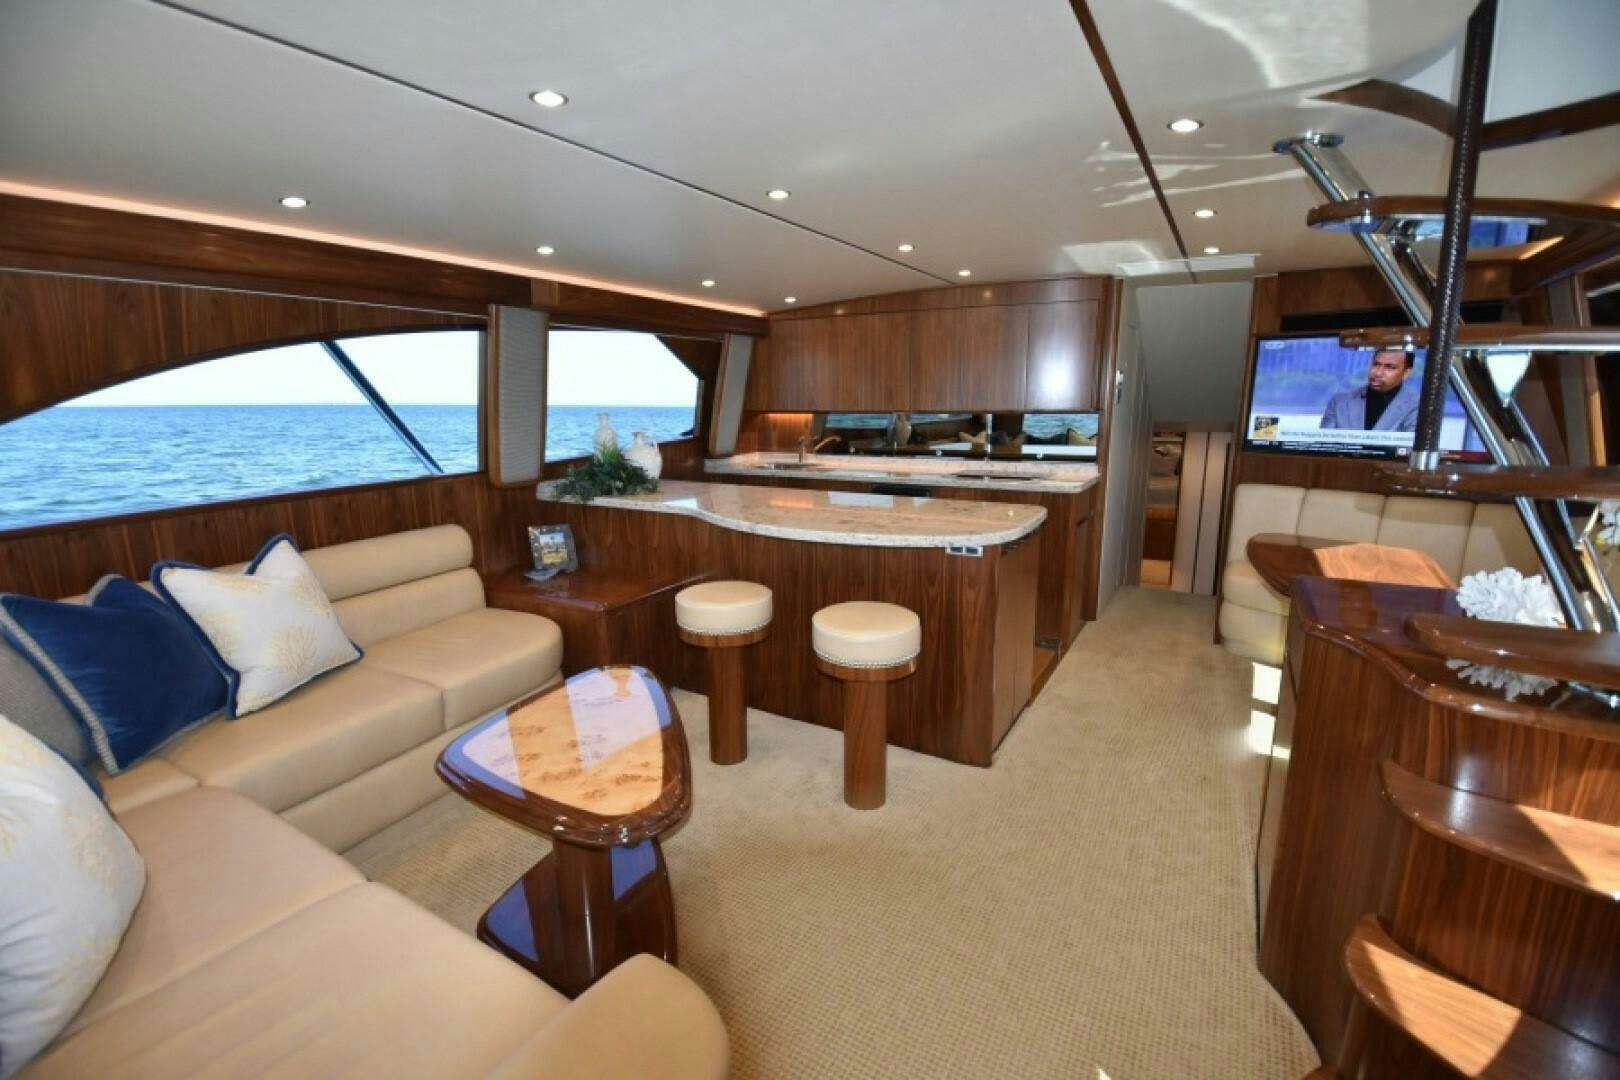 Tail dancer
Yacht for Sale